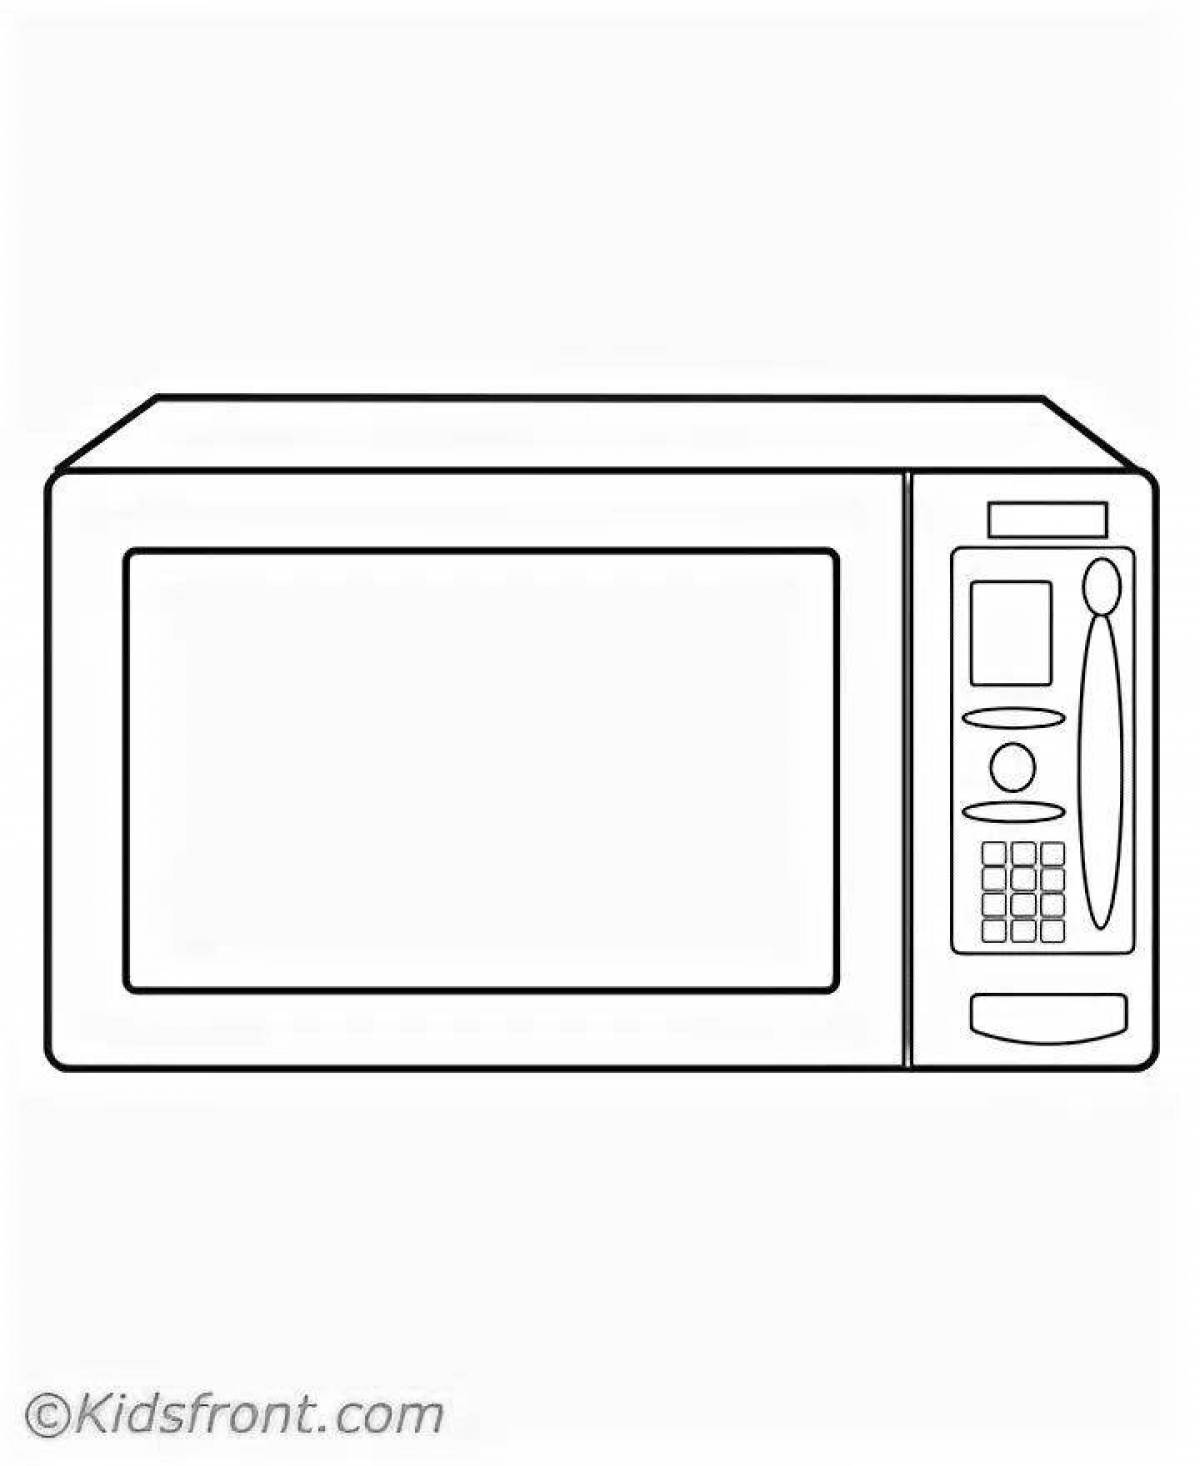 Playful microwave coloring book